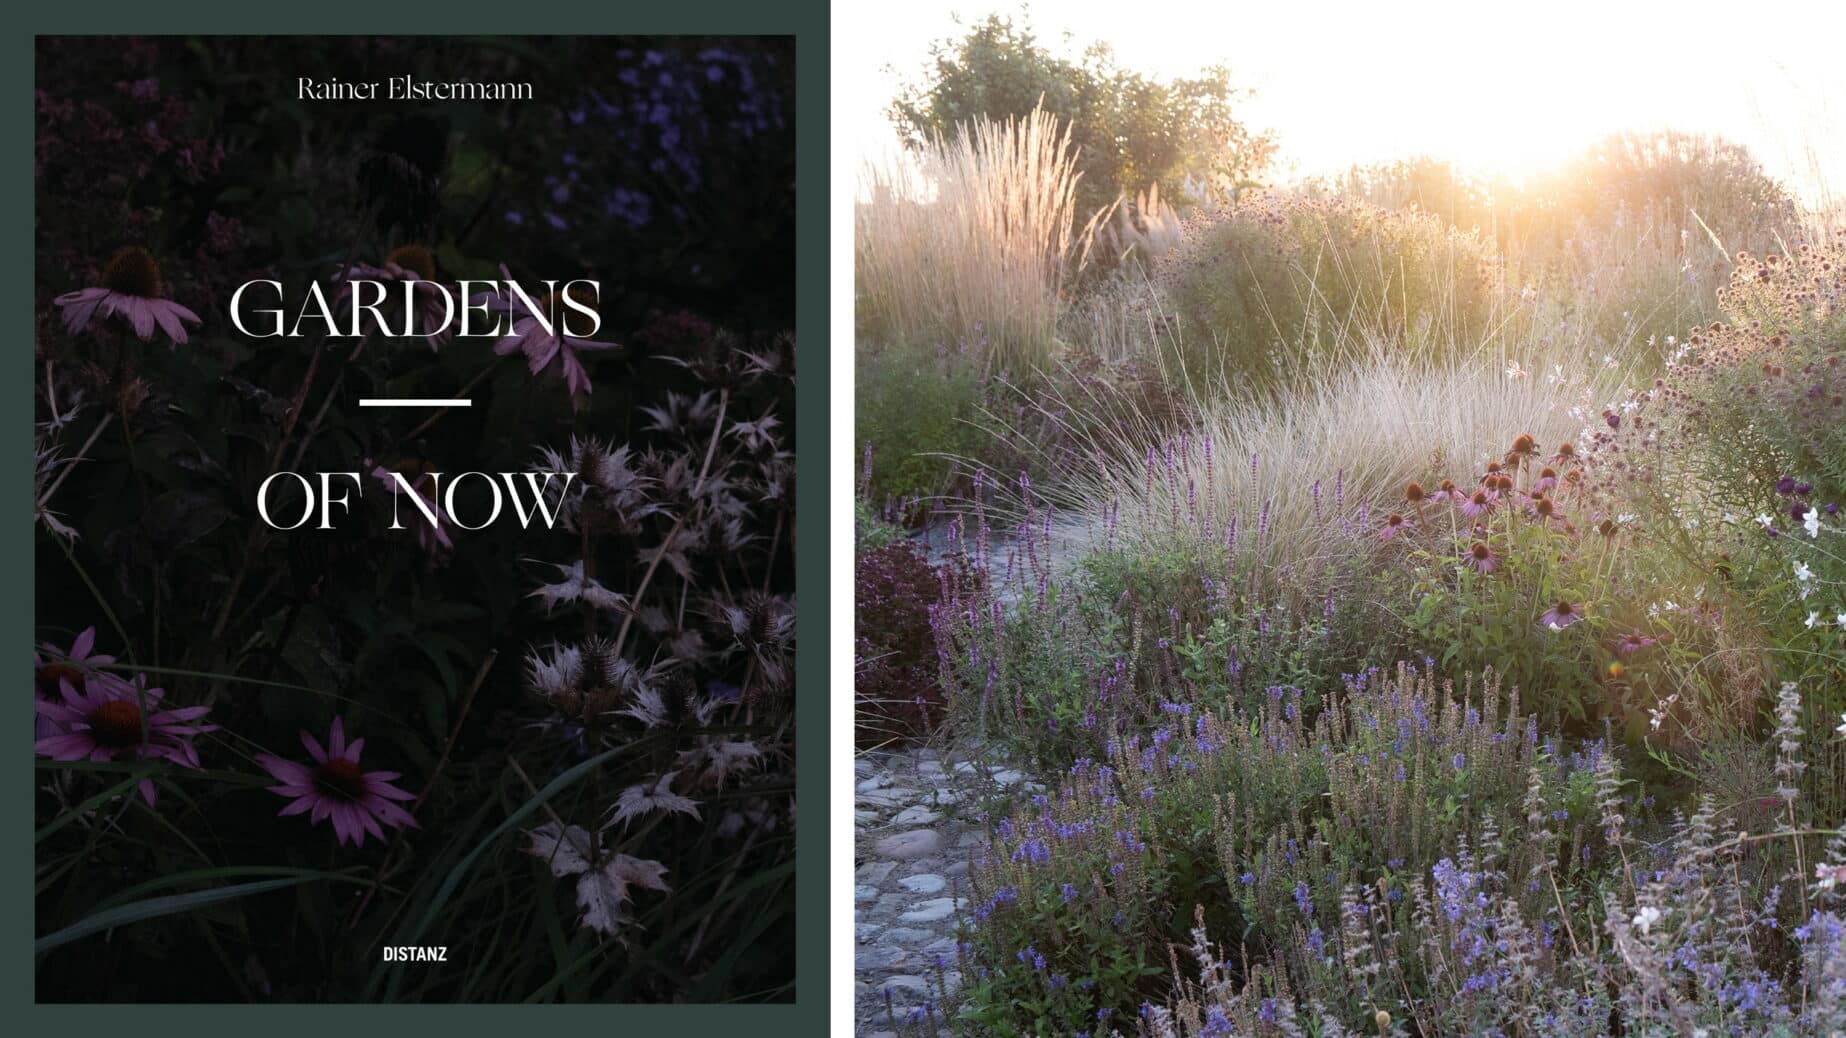 Recommended reading: Gardens of Now